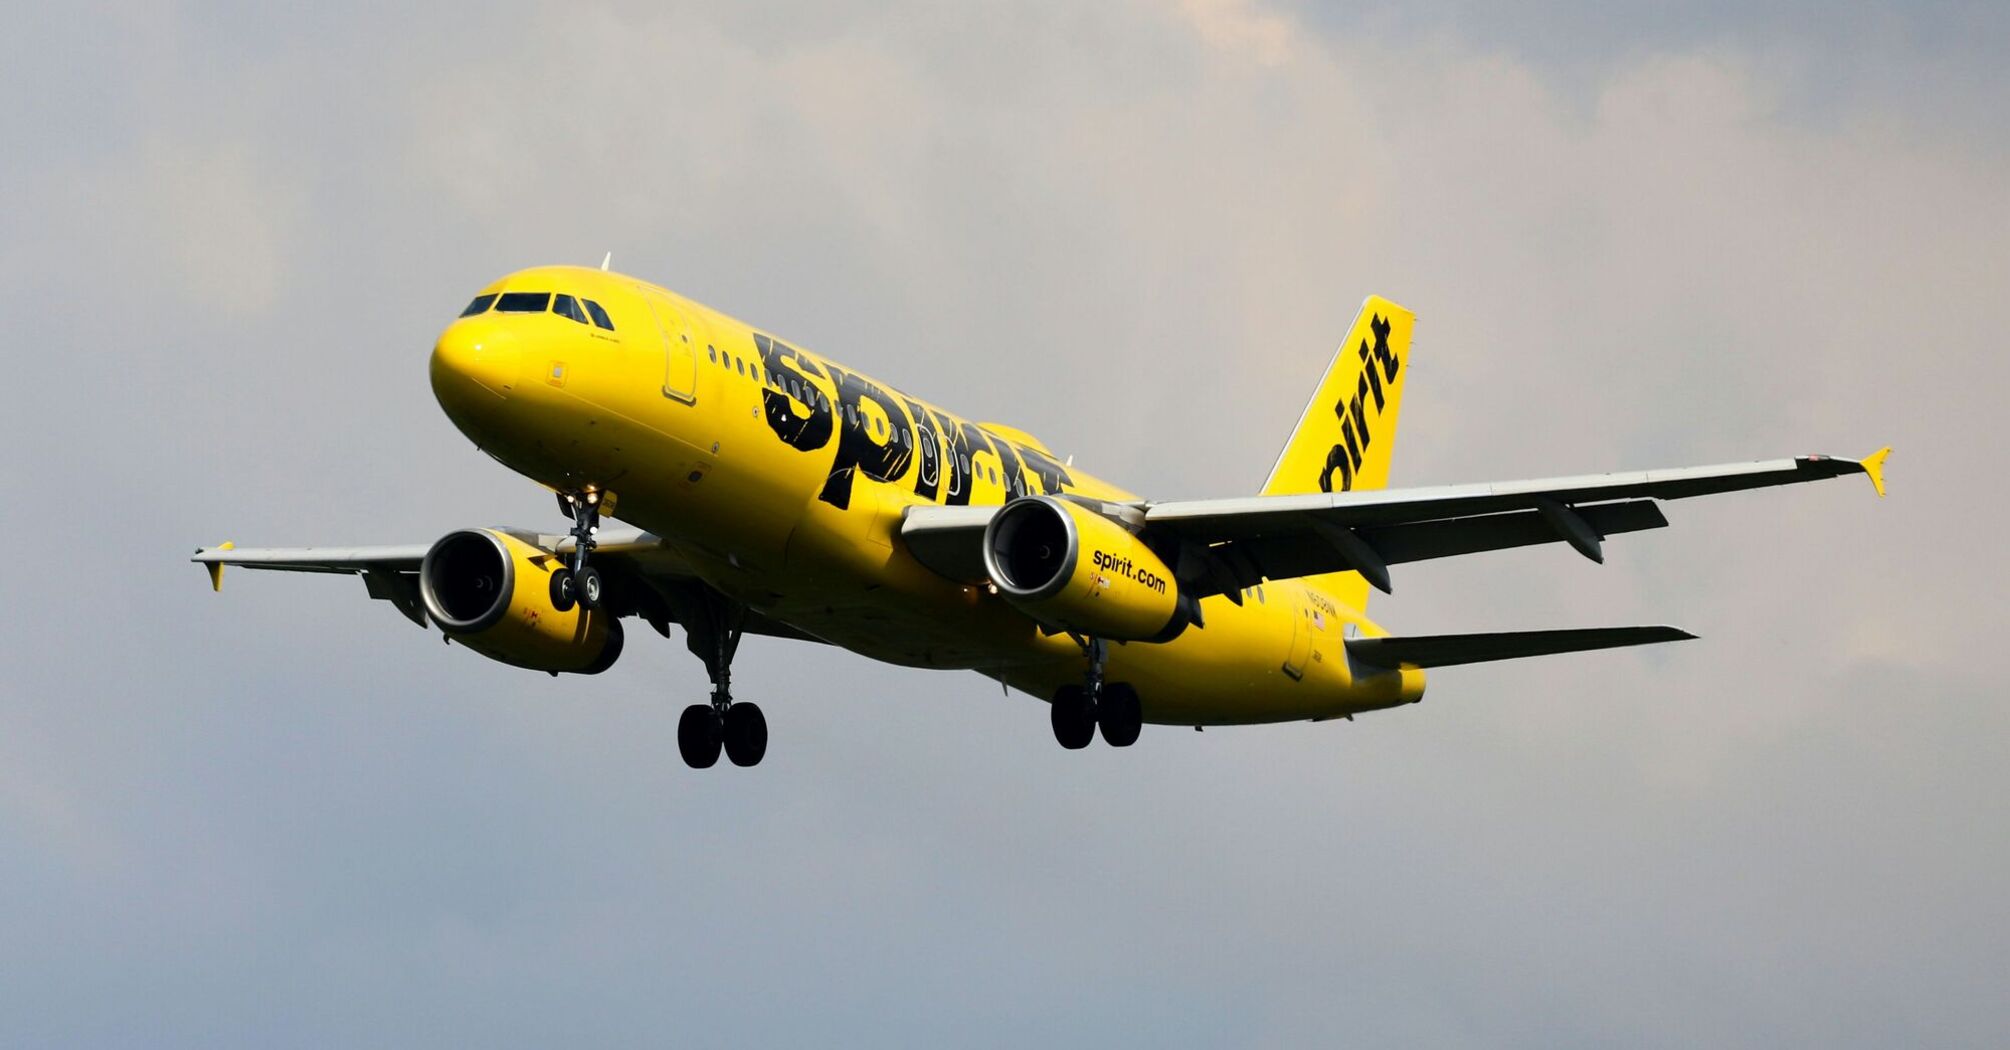 A yellow and black Spirit airlines airplane flying